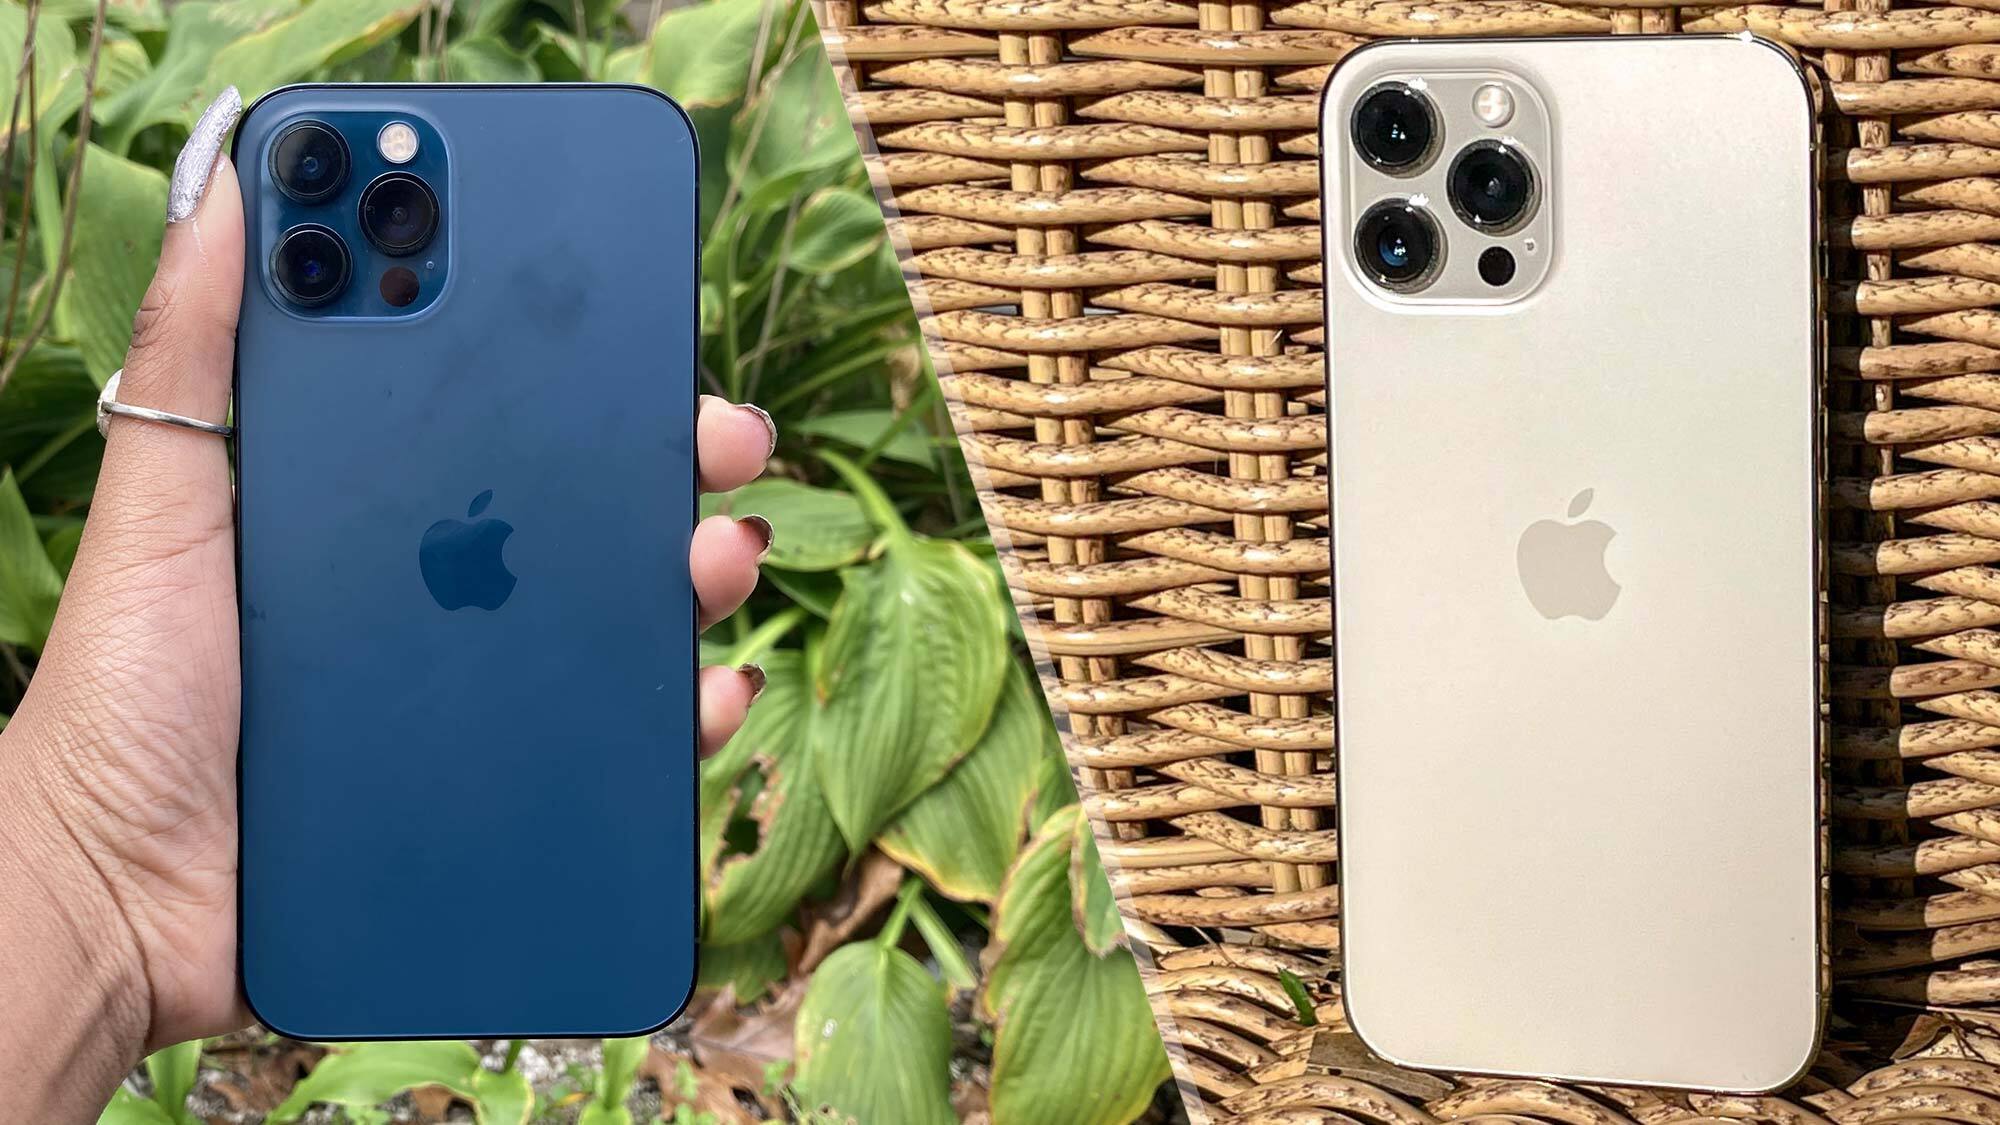 iPhone 12 pro vs iPhone 12: What's the difference and which is better?